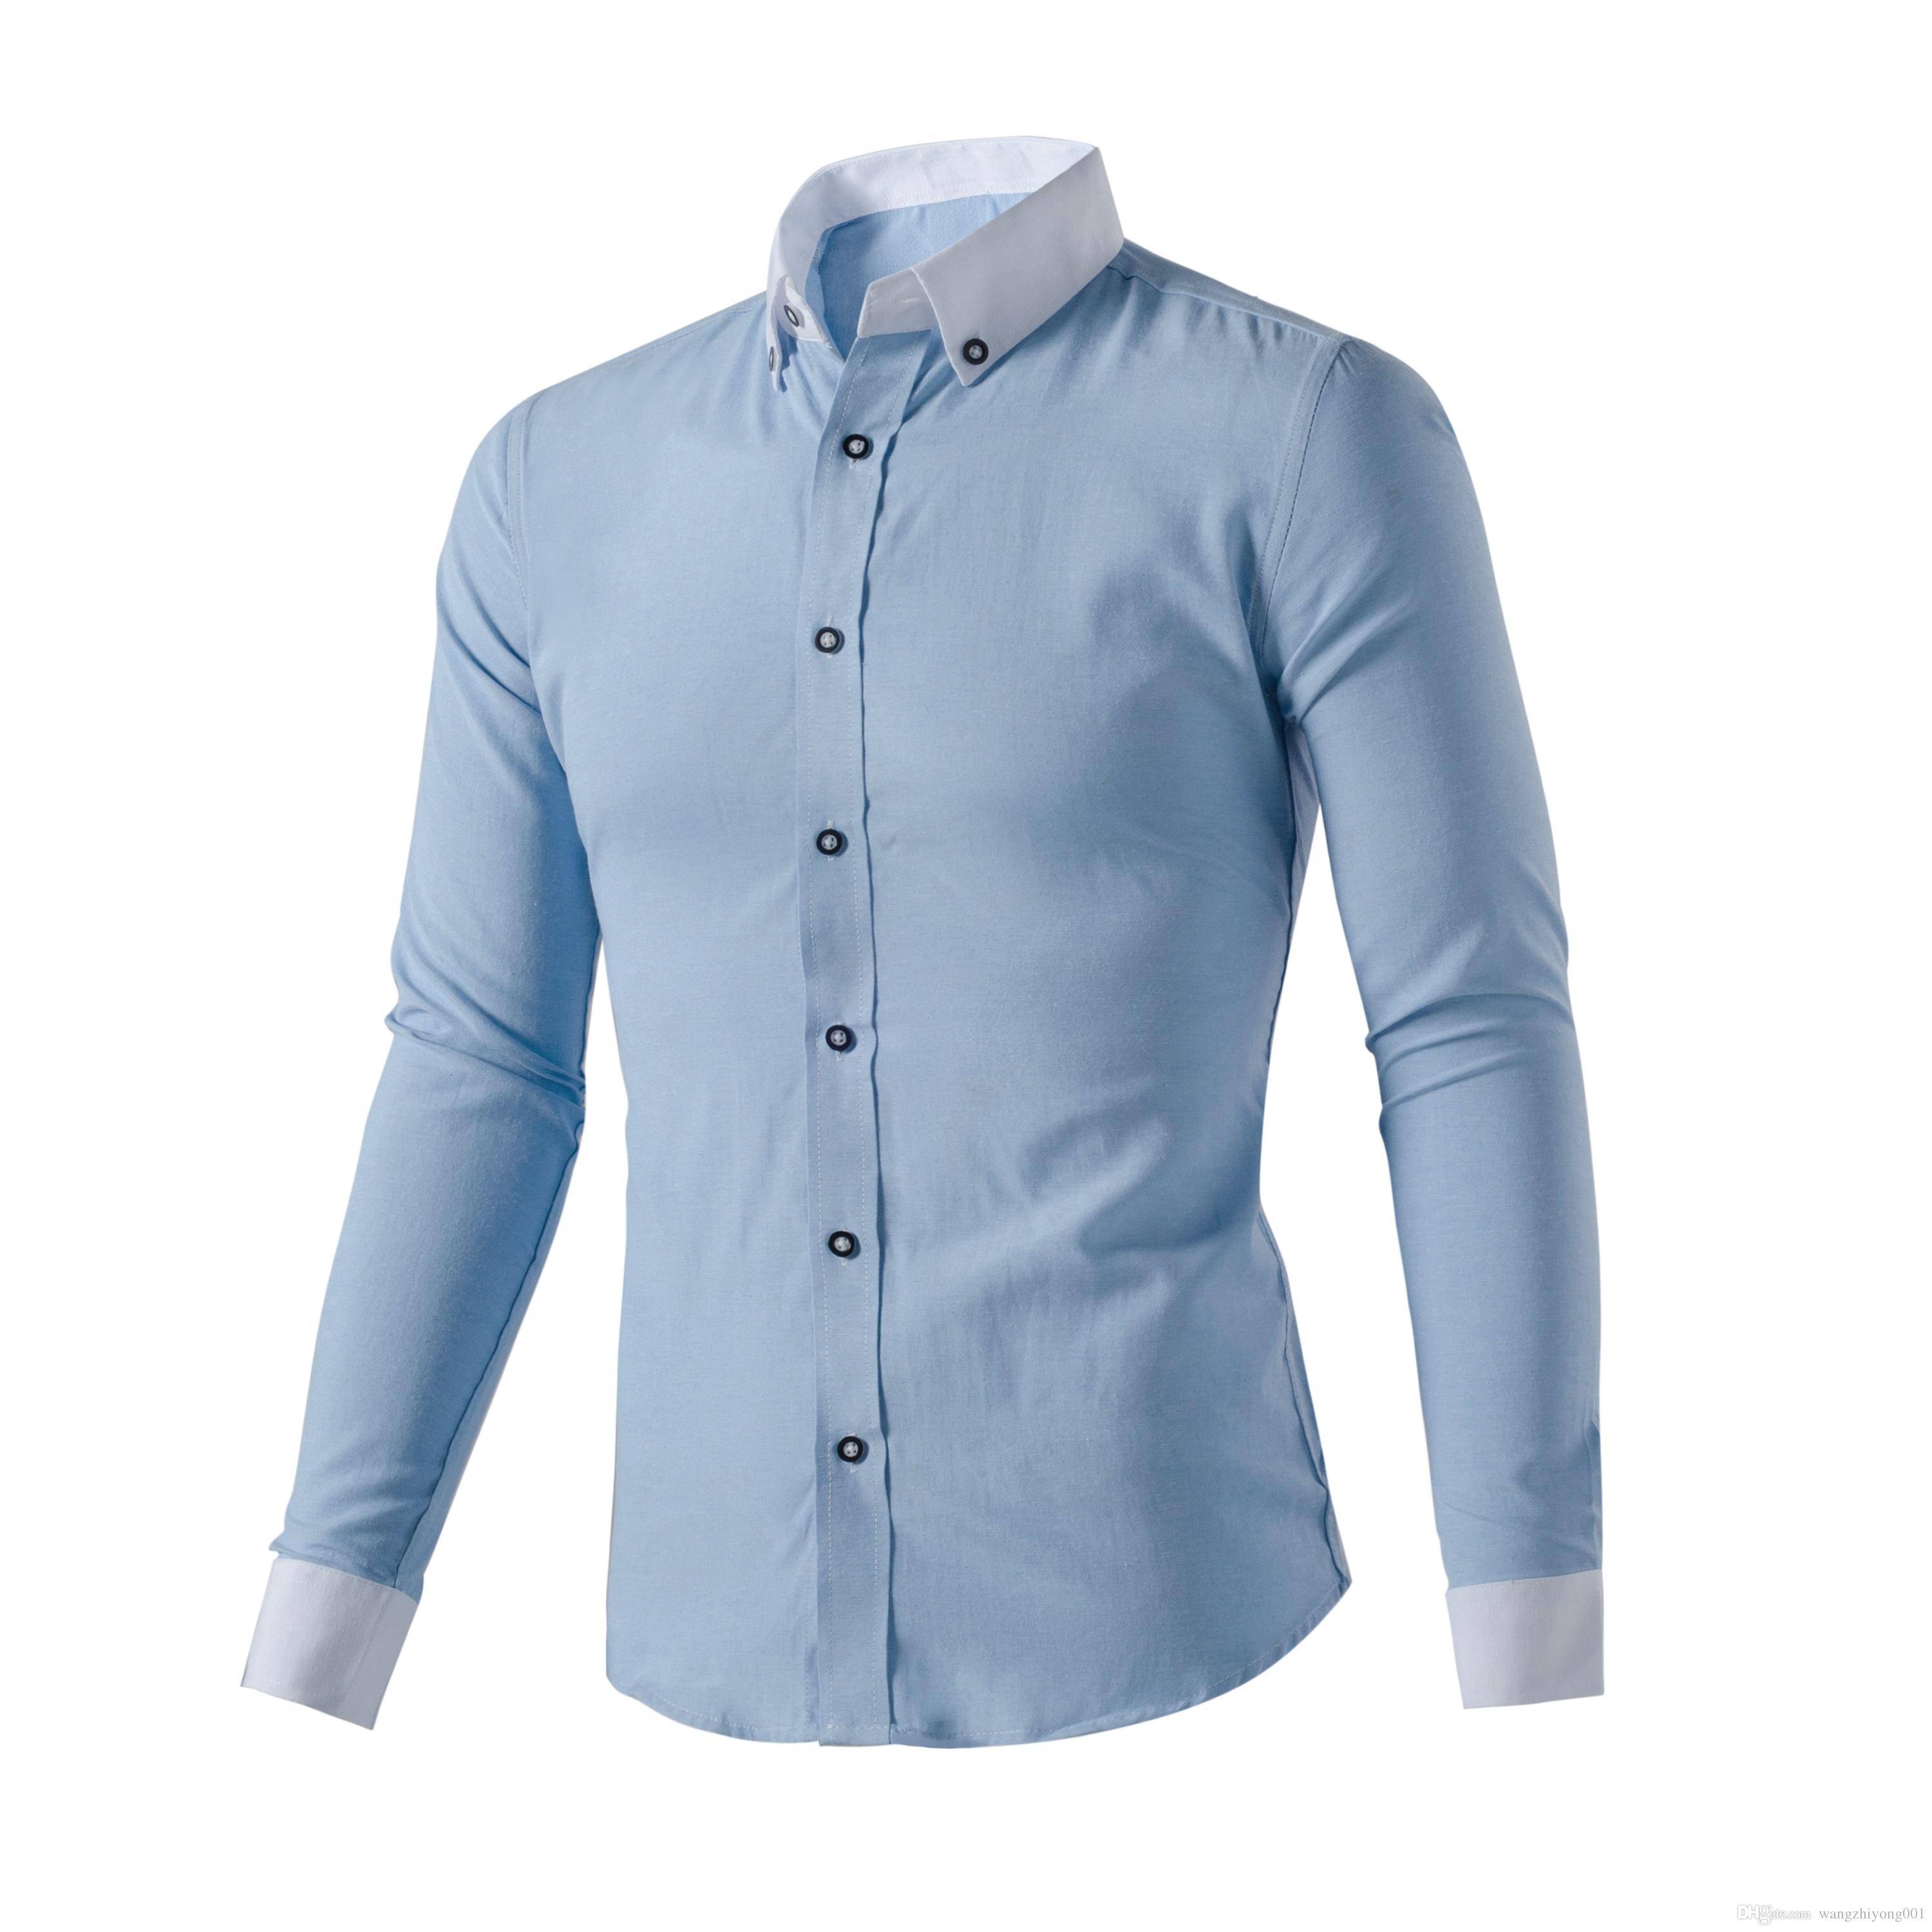 Cotton Shirts- available in many appealing colors and patterns